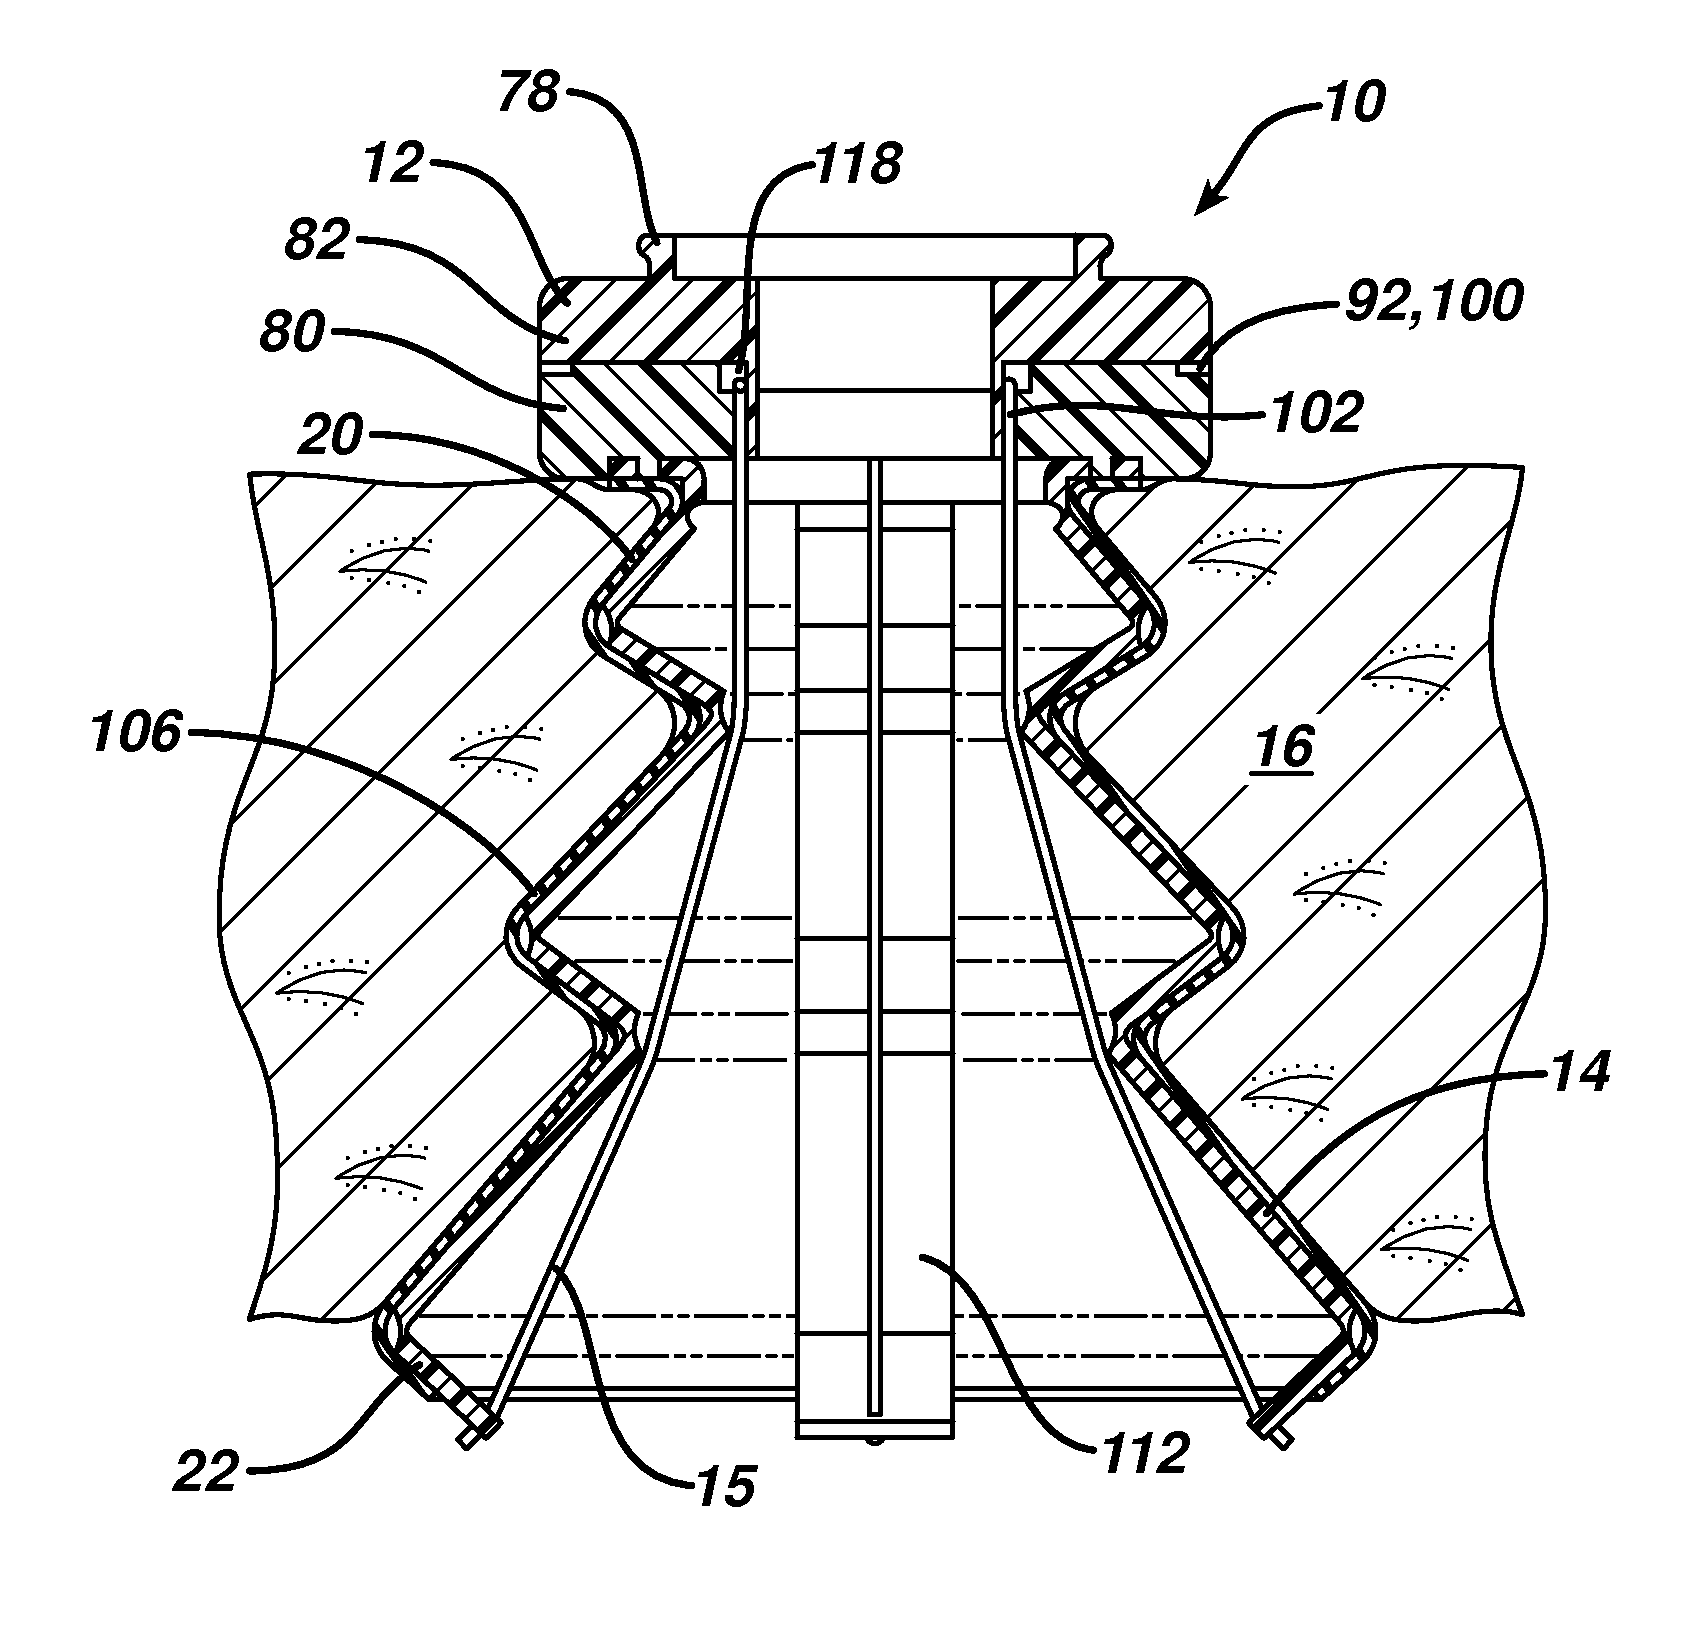 Inverted conical expandable retractor with coil spring